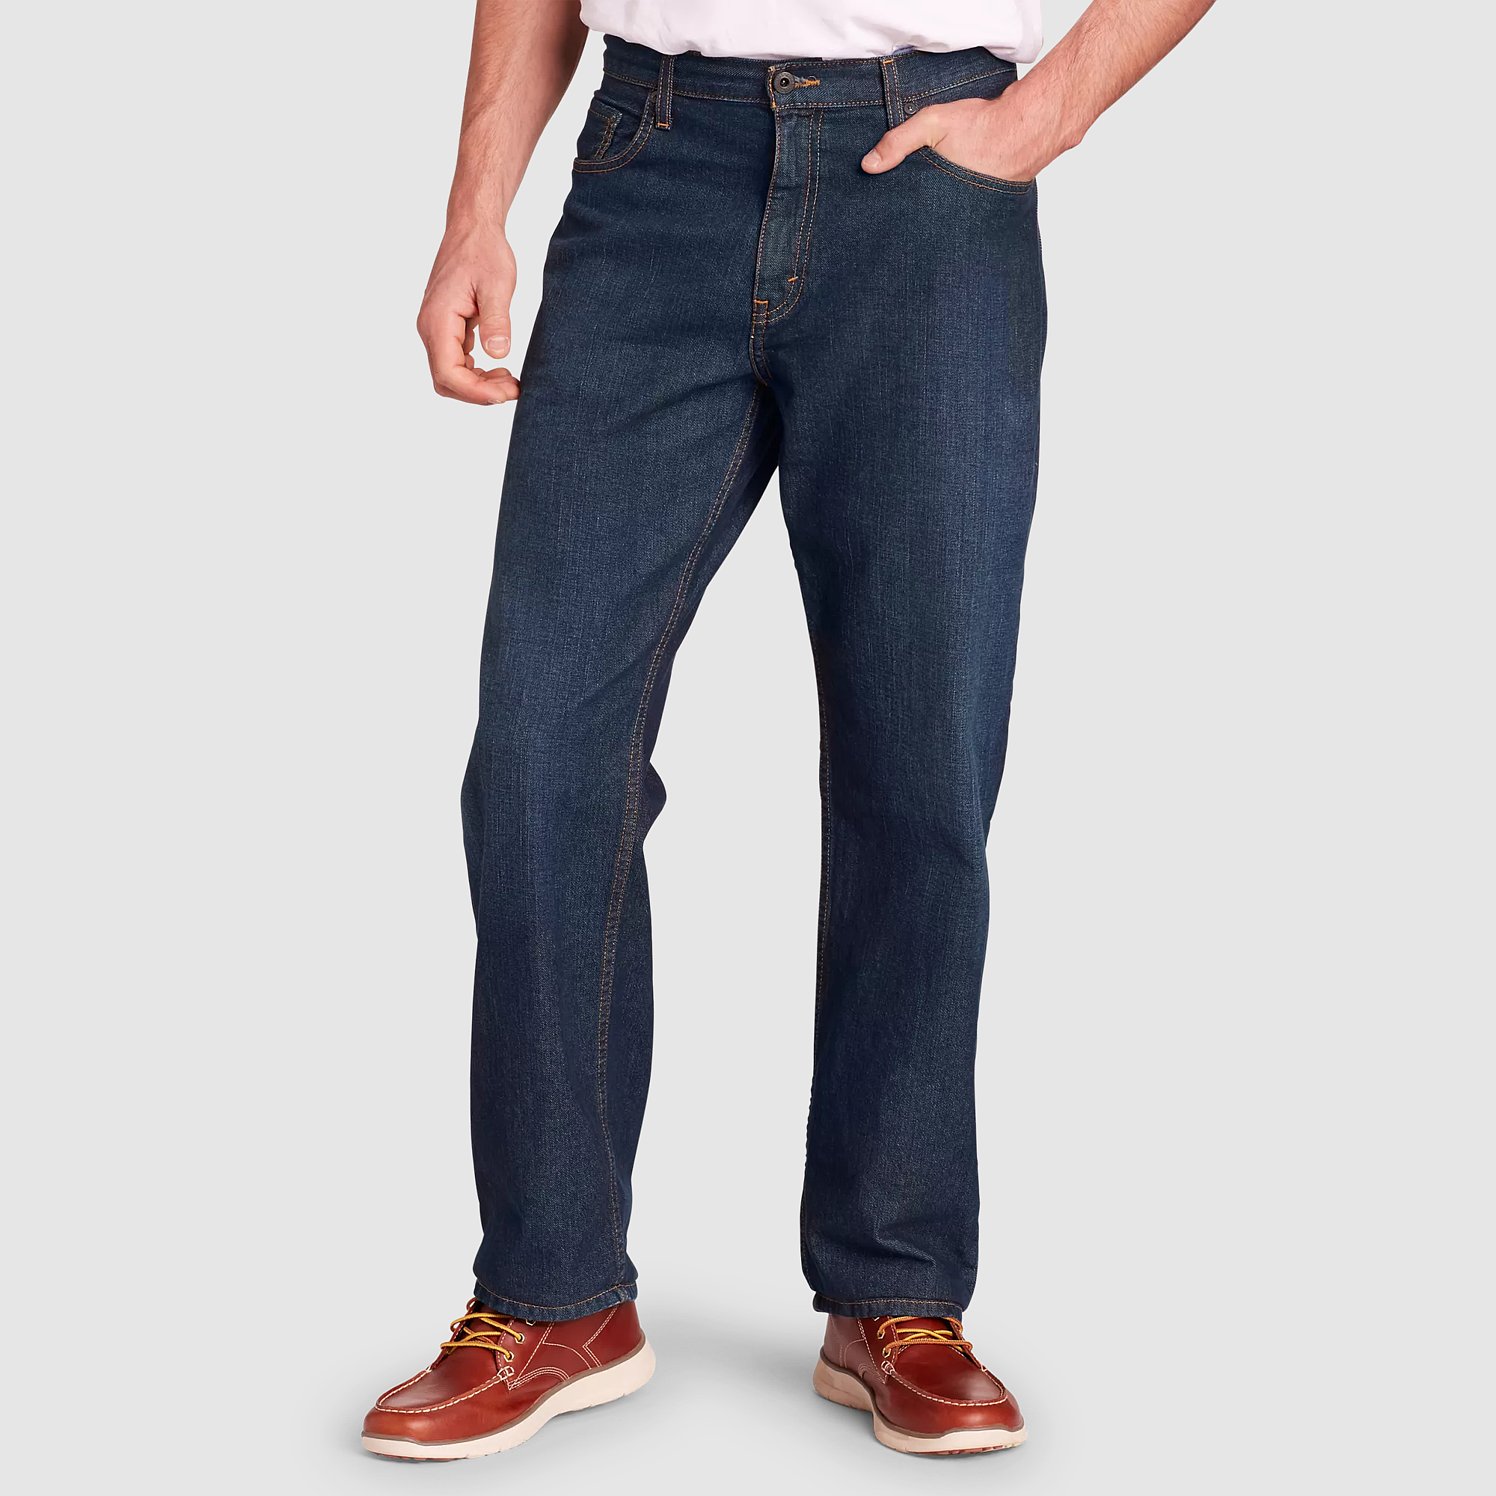 Men's Authentic Jeans - Relaxed